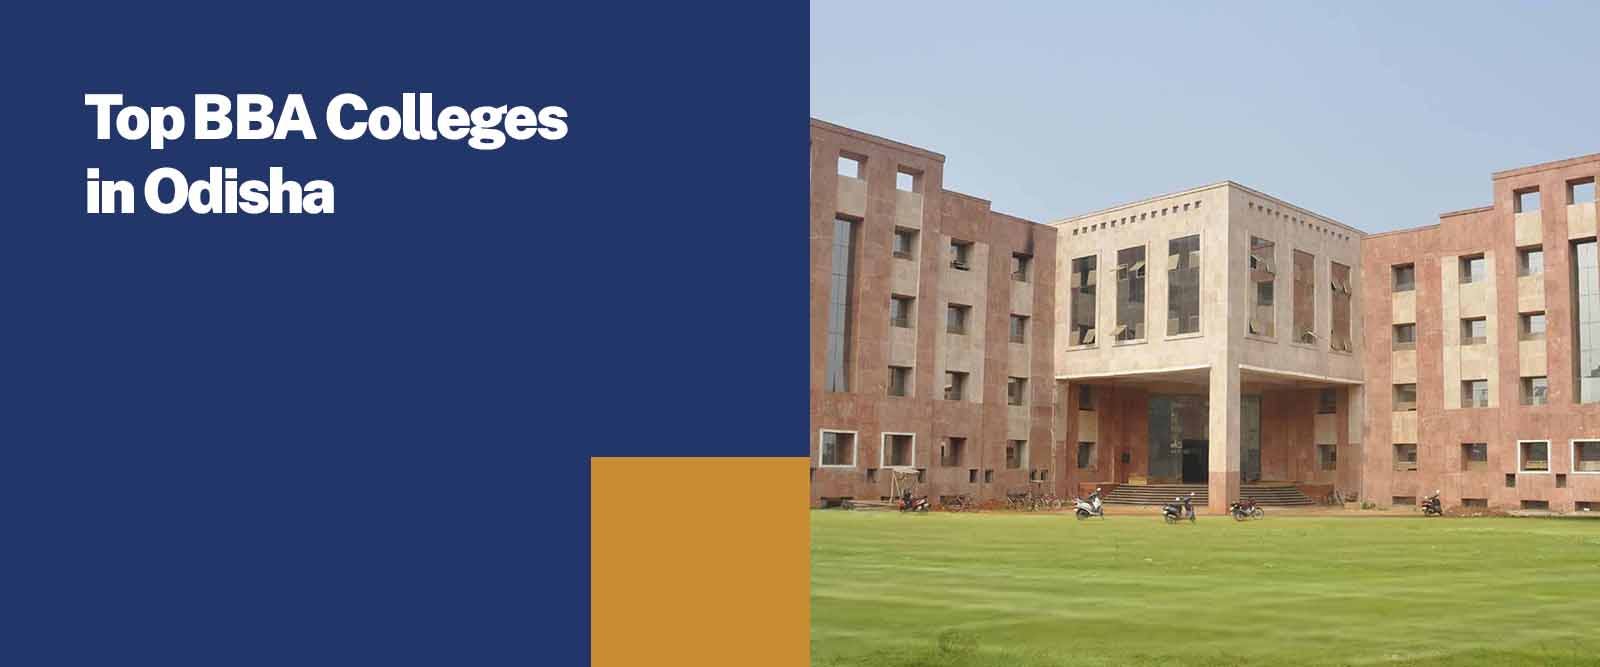 BBA Colleges in Odisha